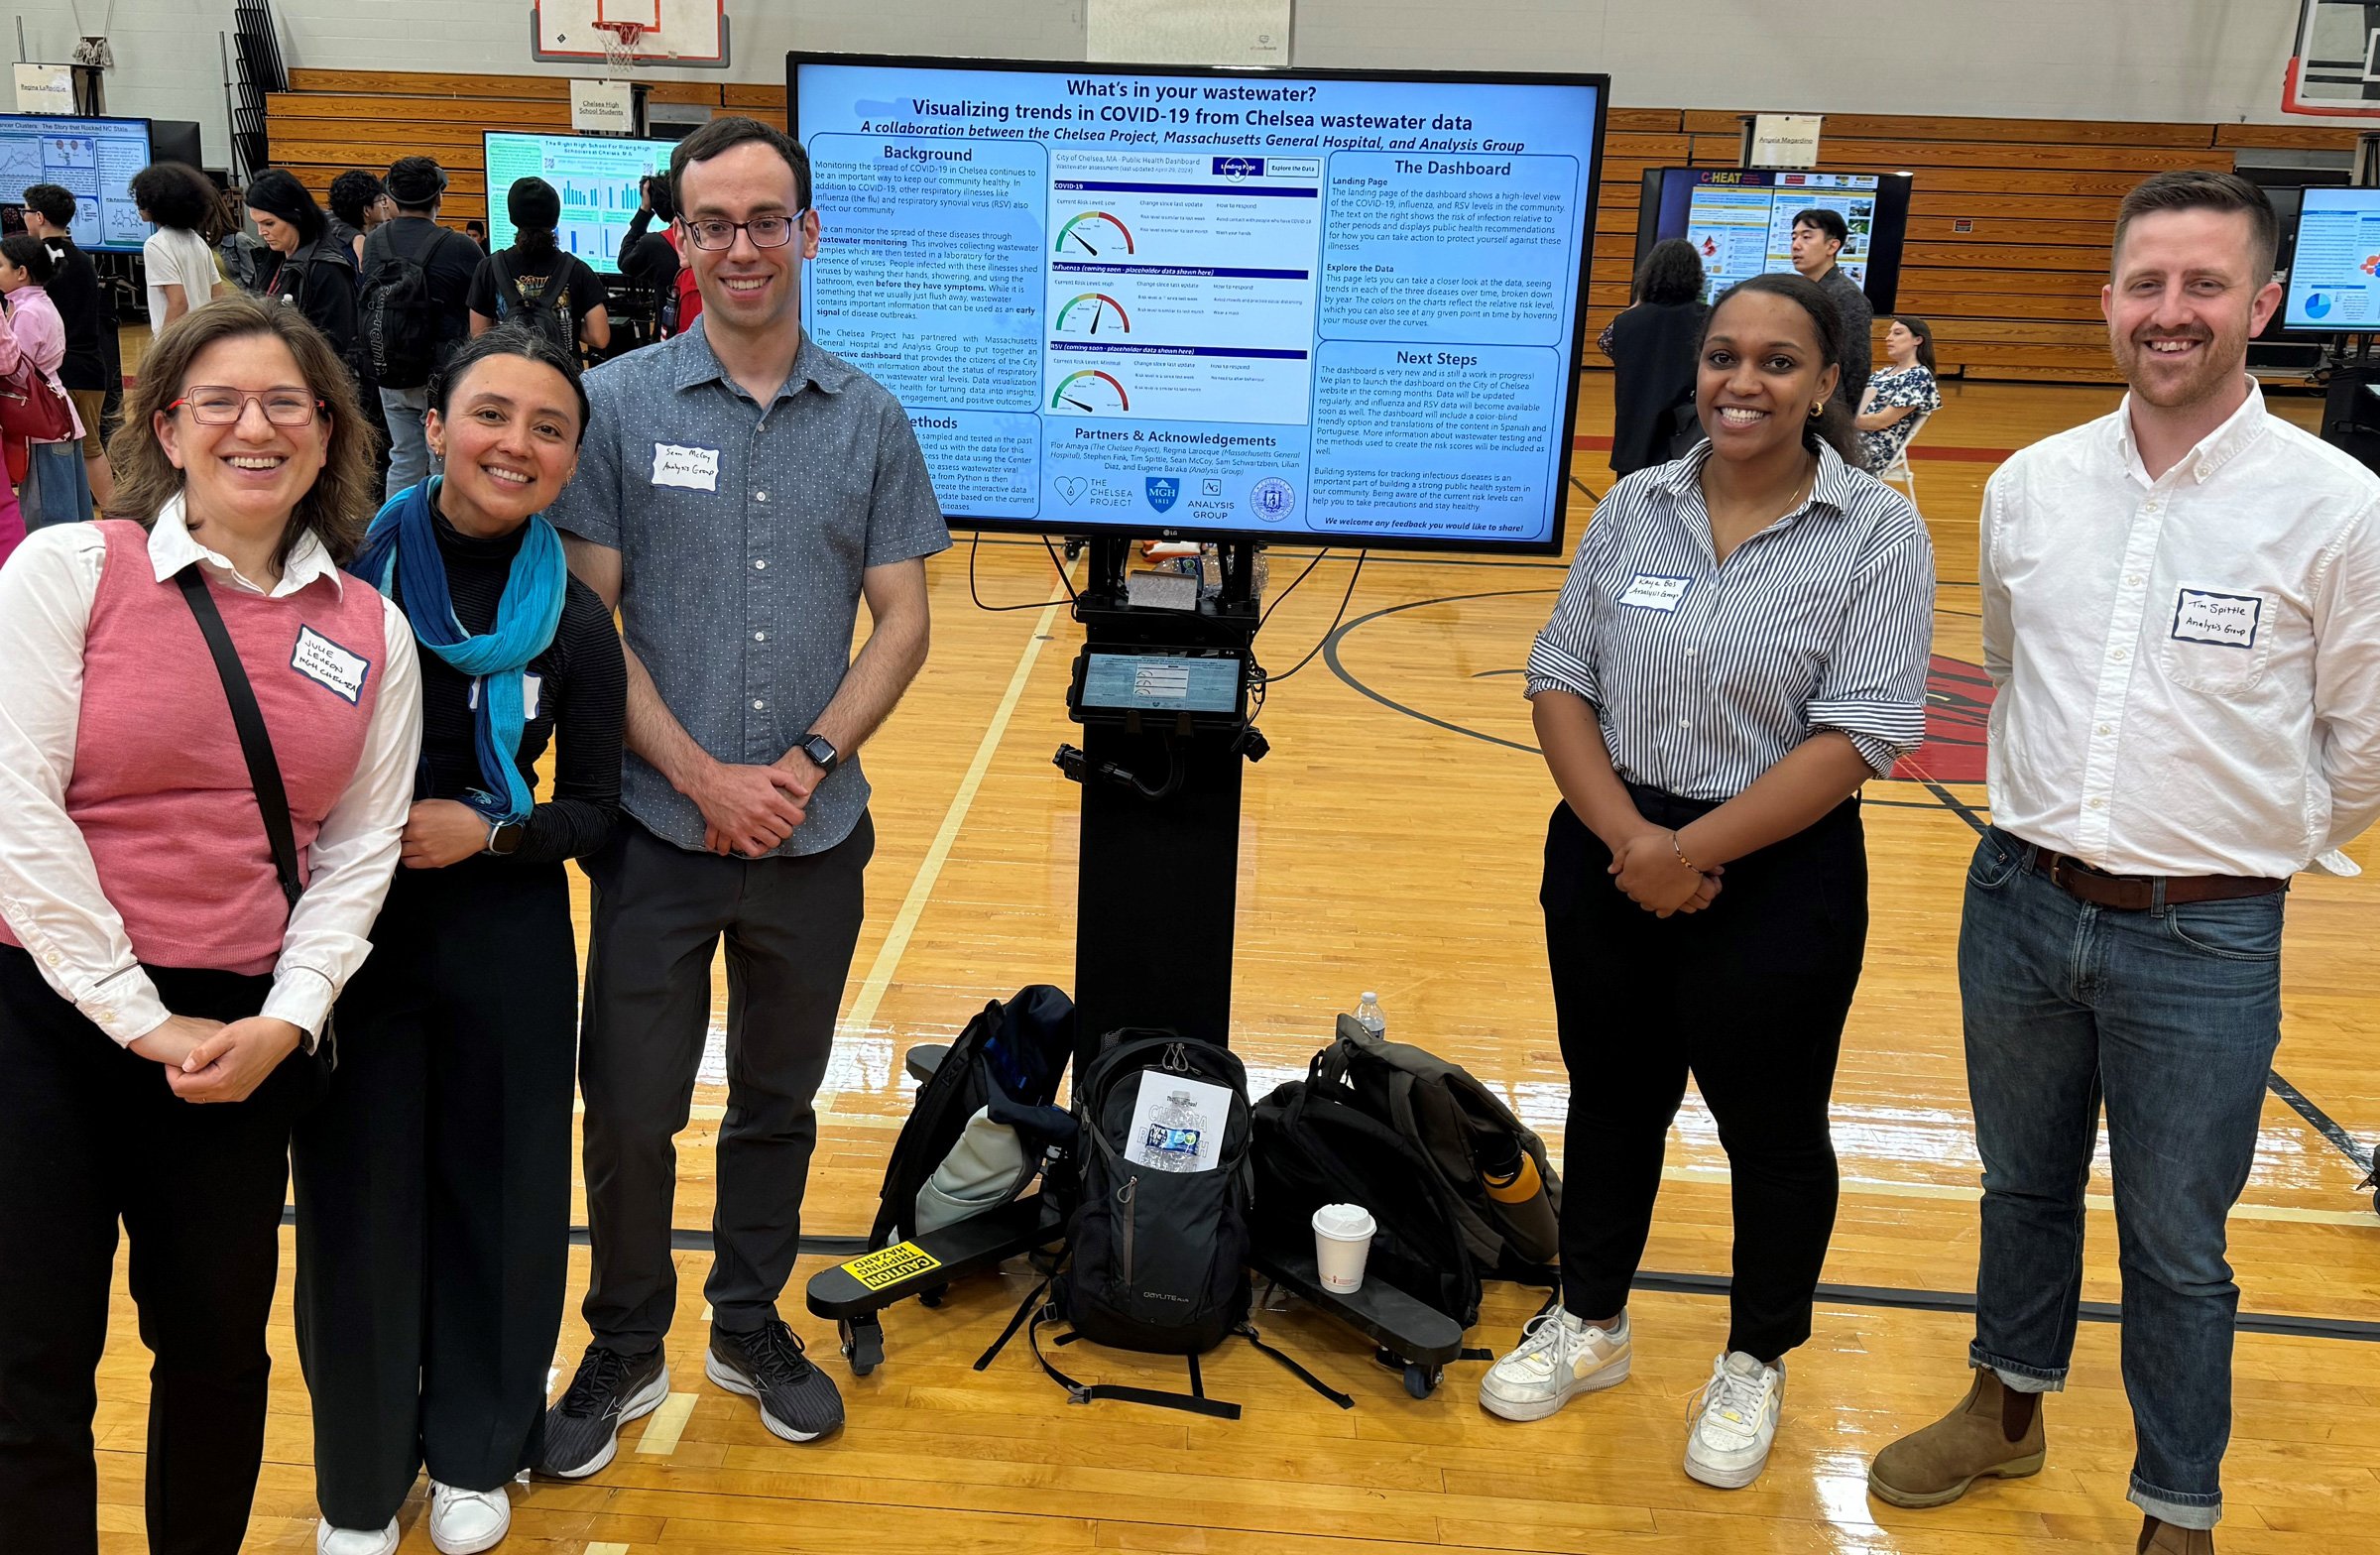 Pictured: Julie Levison (Massachusetts General Hospital), Flor Amaya (City of Chelsea), and Analysis Group Managers Sean McCoy and Tim Spittle and Senior Analyst Kaya Bos